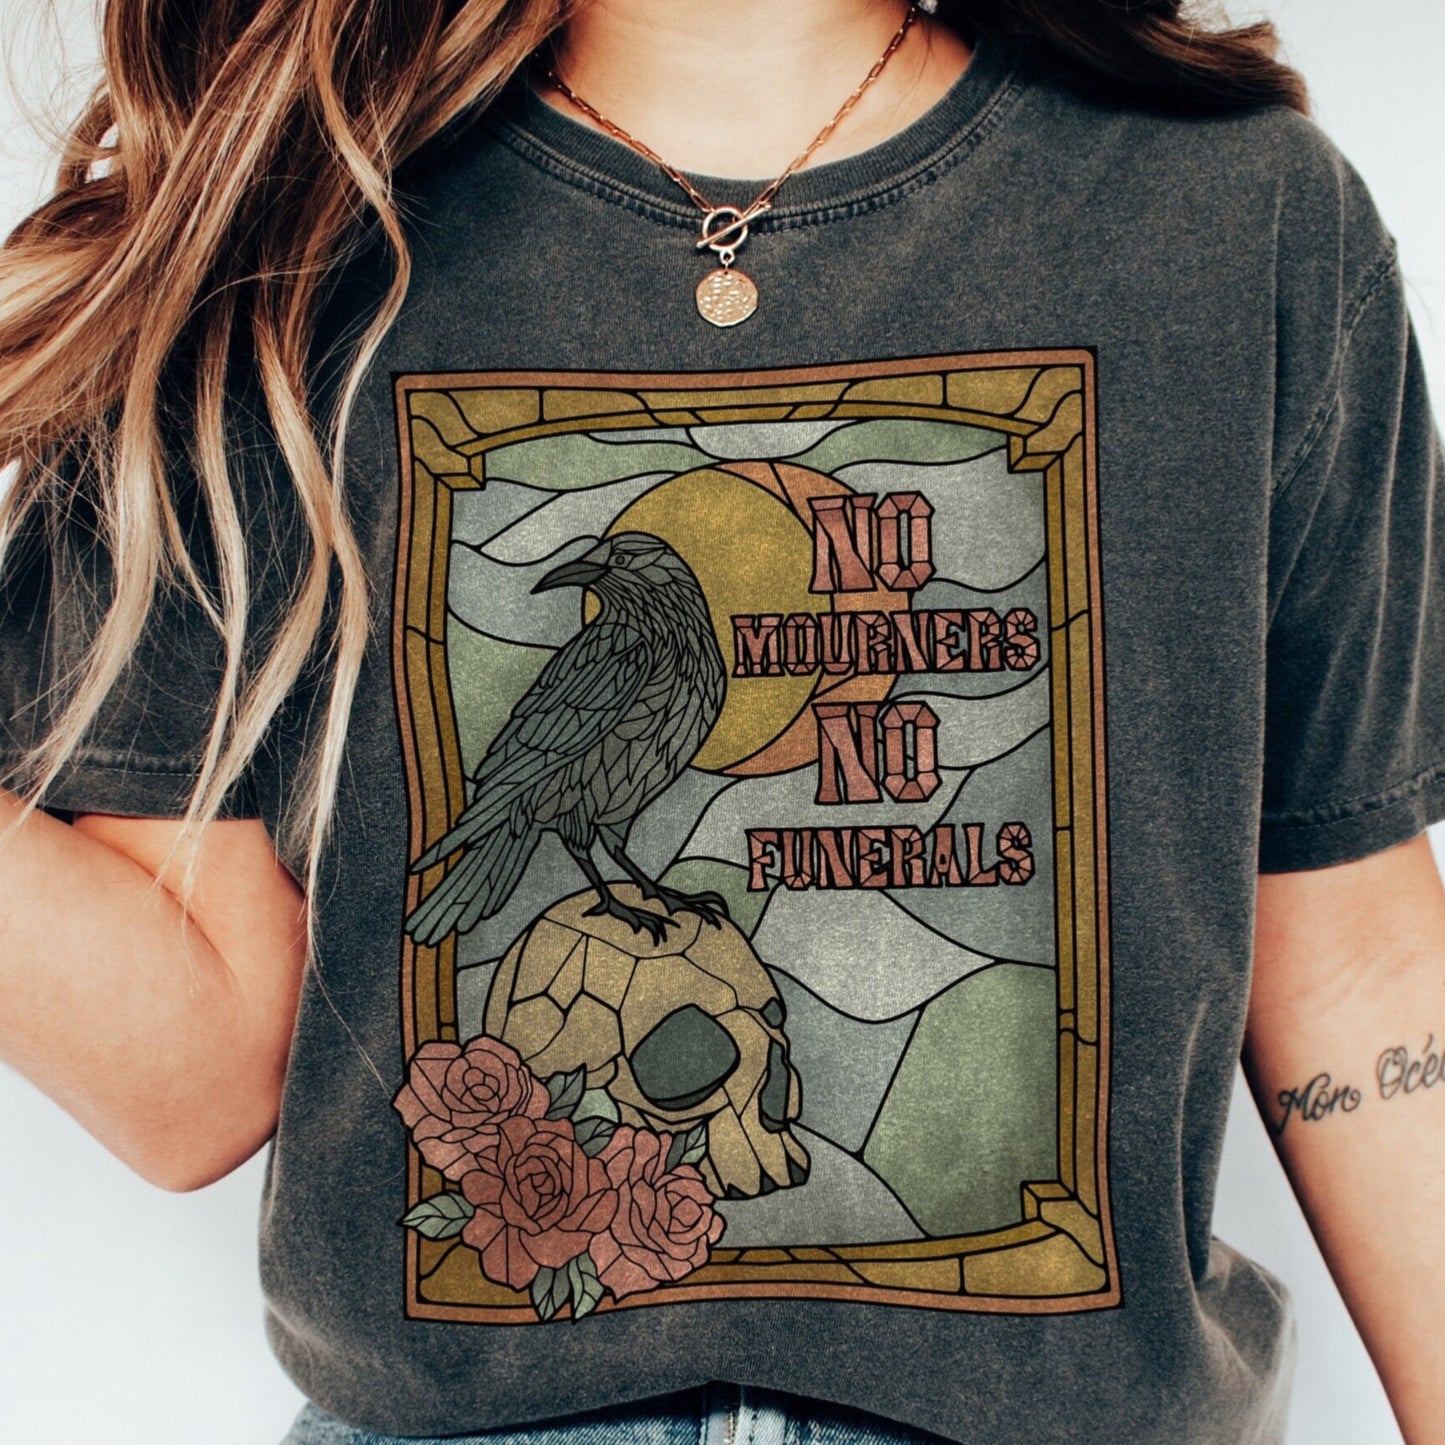 Six of Crows Ketterdam Tee - Bookish Stained Glass Style Shirt - No Mourners No Funerals